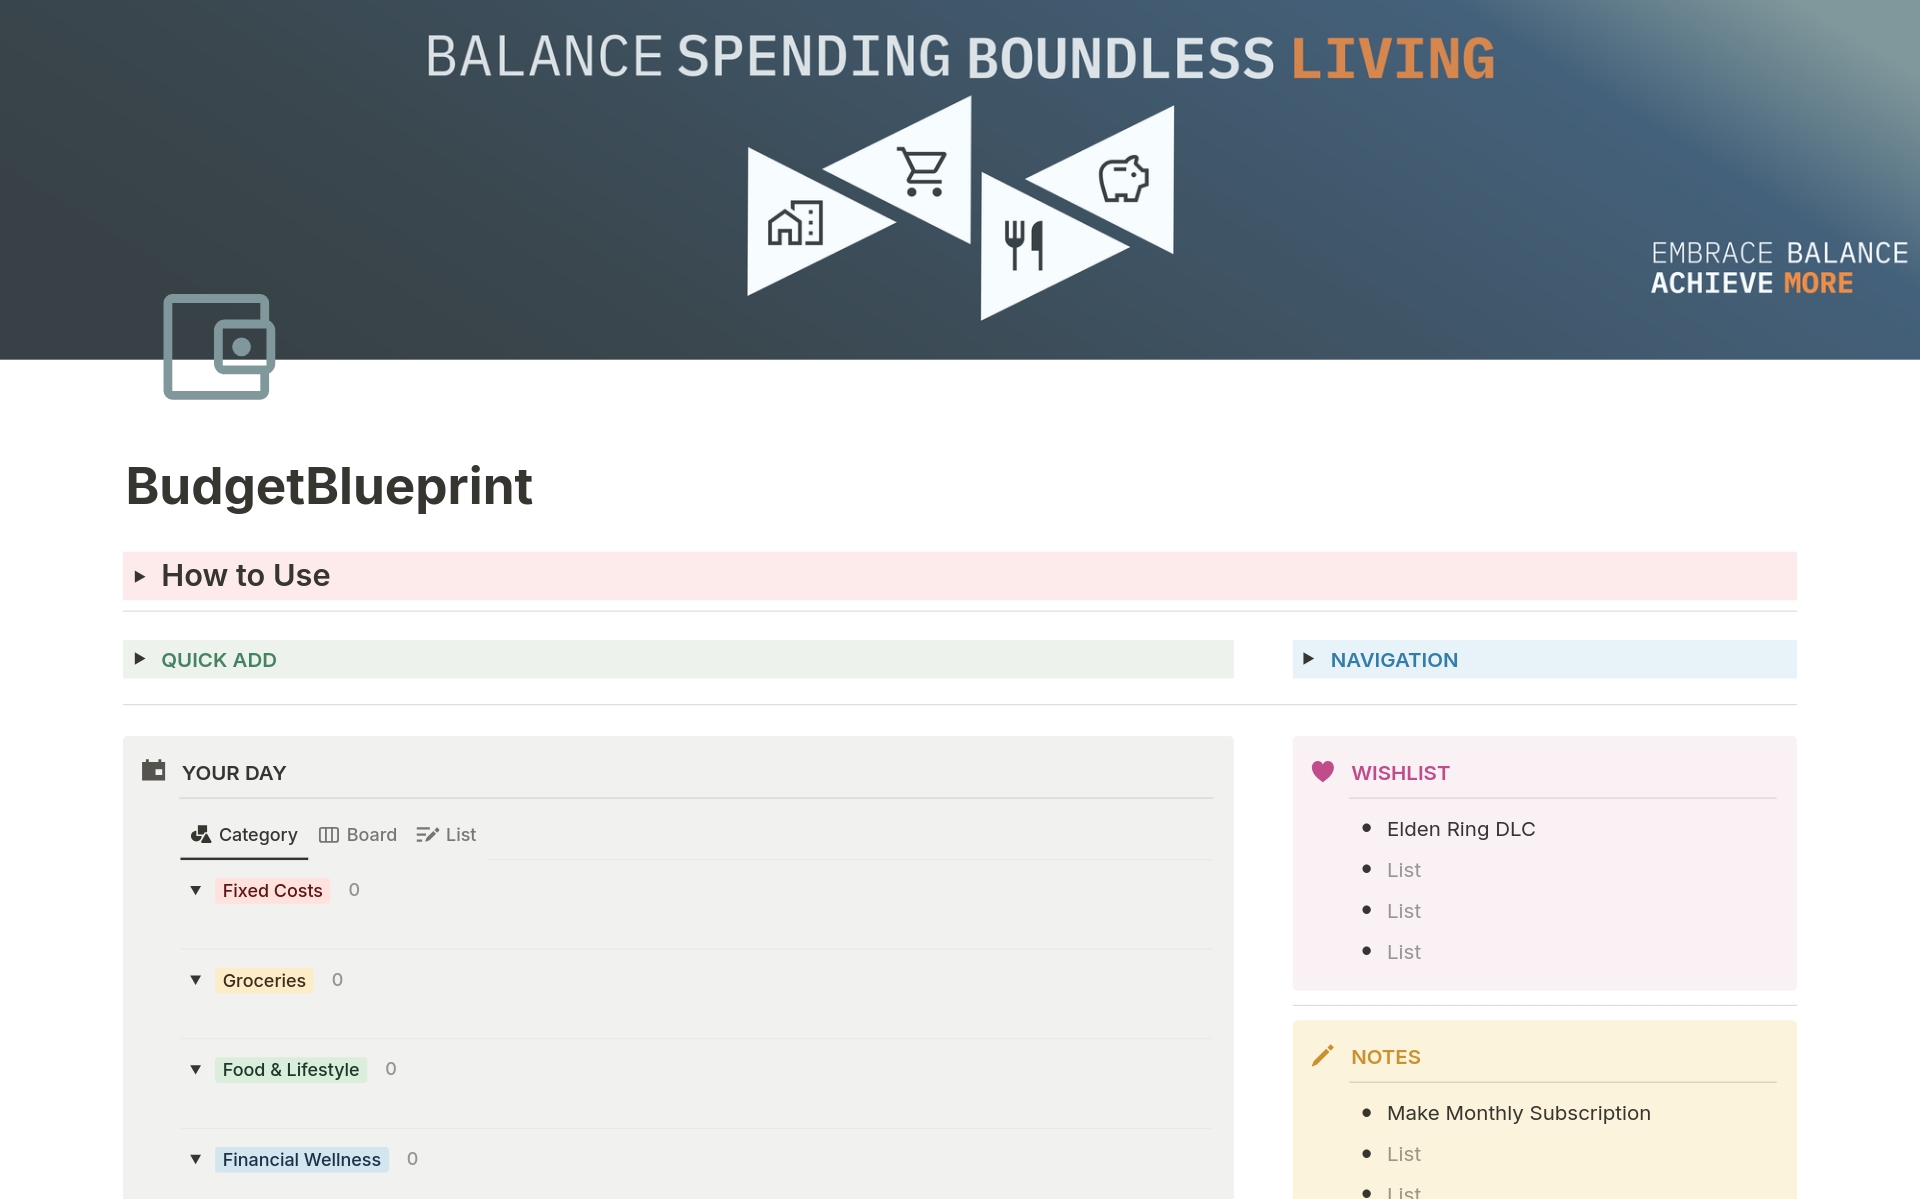 Discover BudgetBlueprint: Revolutionize your budgeting with our new Notion template! Inspired by Kakeibo principles, achieve balance in spending and unlock boundless living. Perfect for anyone ready to take control of their finances. Get started today and transform how you manage